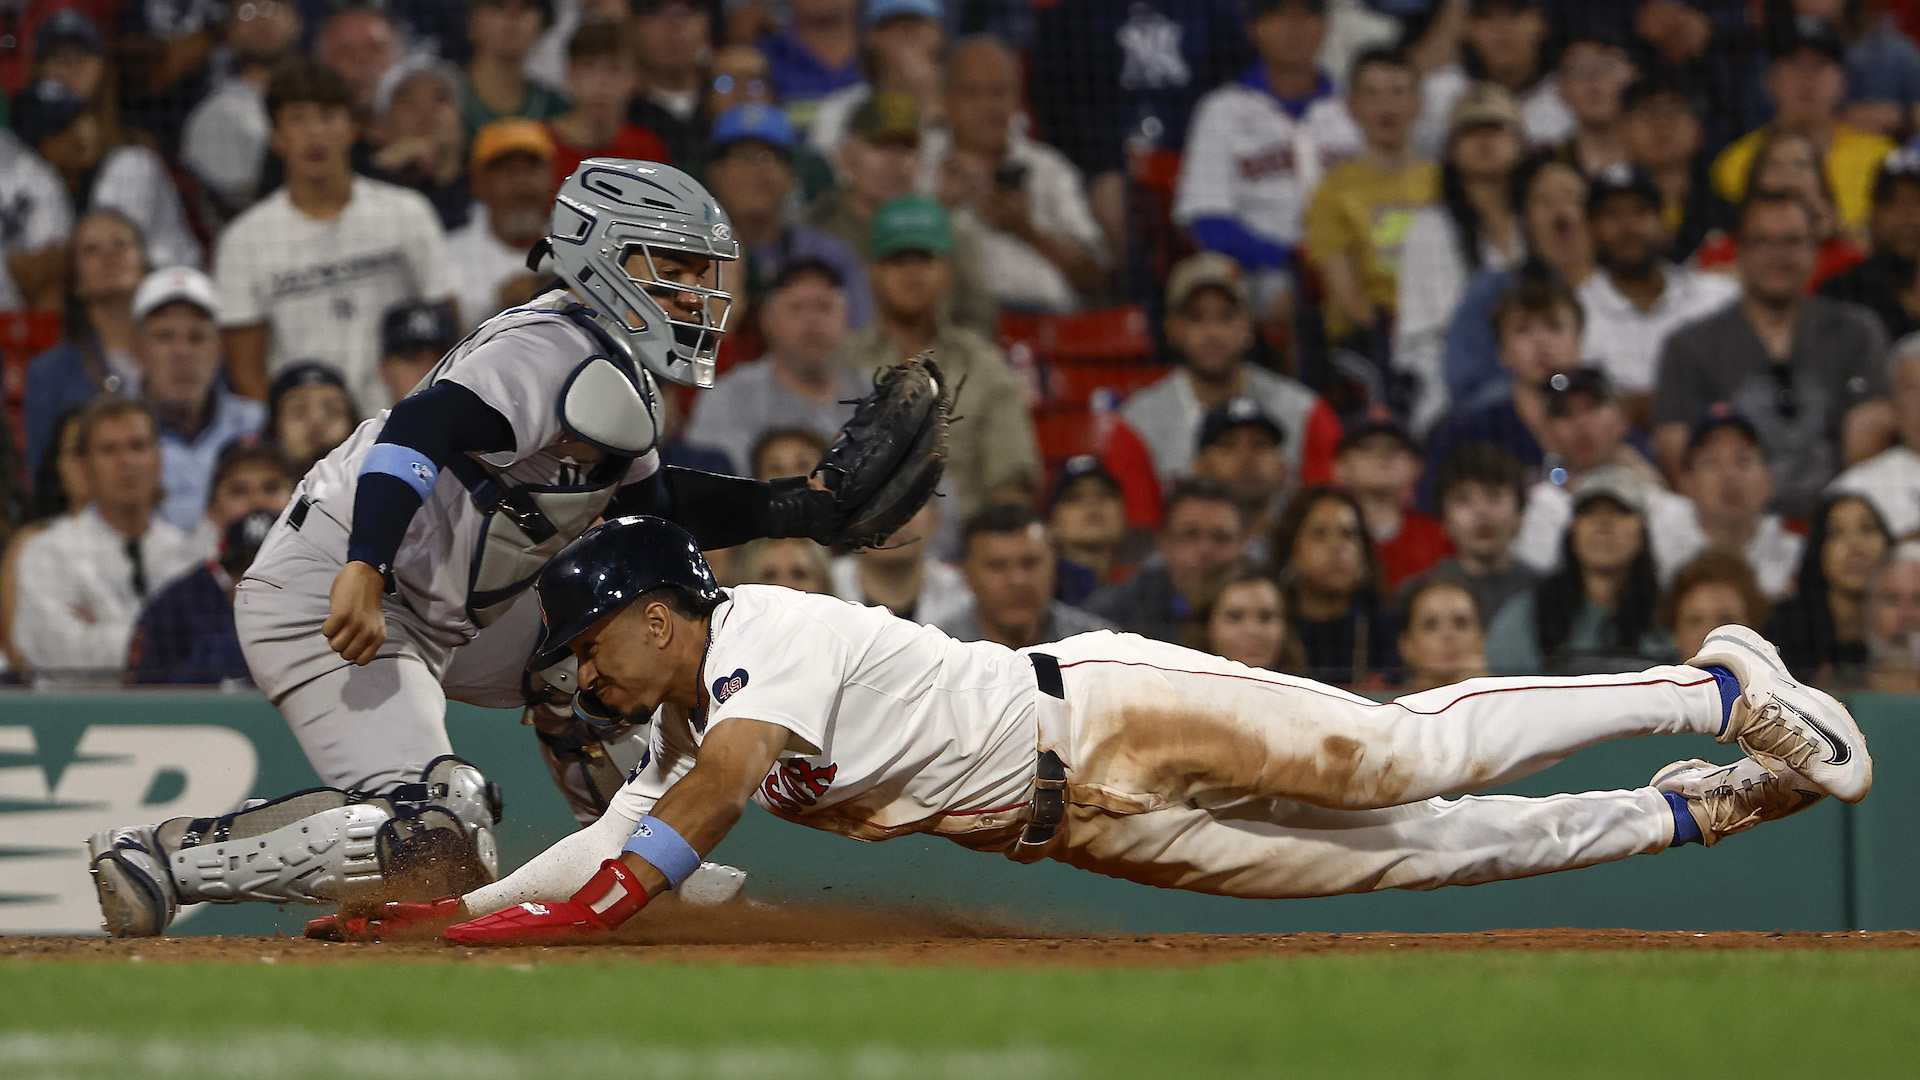 David Hamilton #70 of the Boston Red Sox dives home safely as catcher Jose Trevino #39 of the New York Yankees moves to make a late tag.